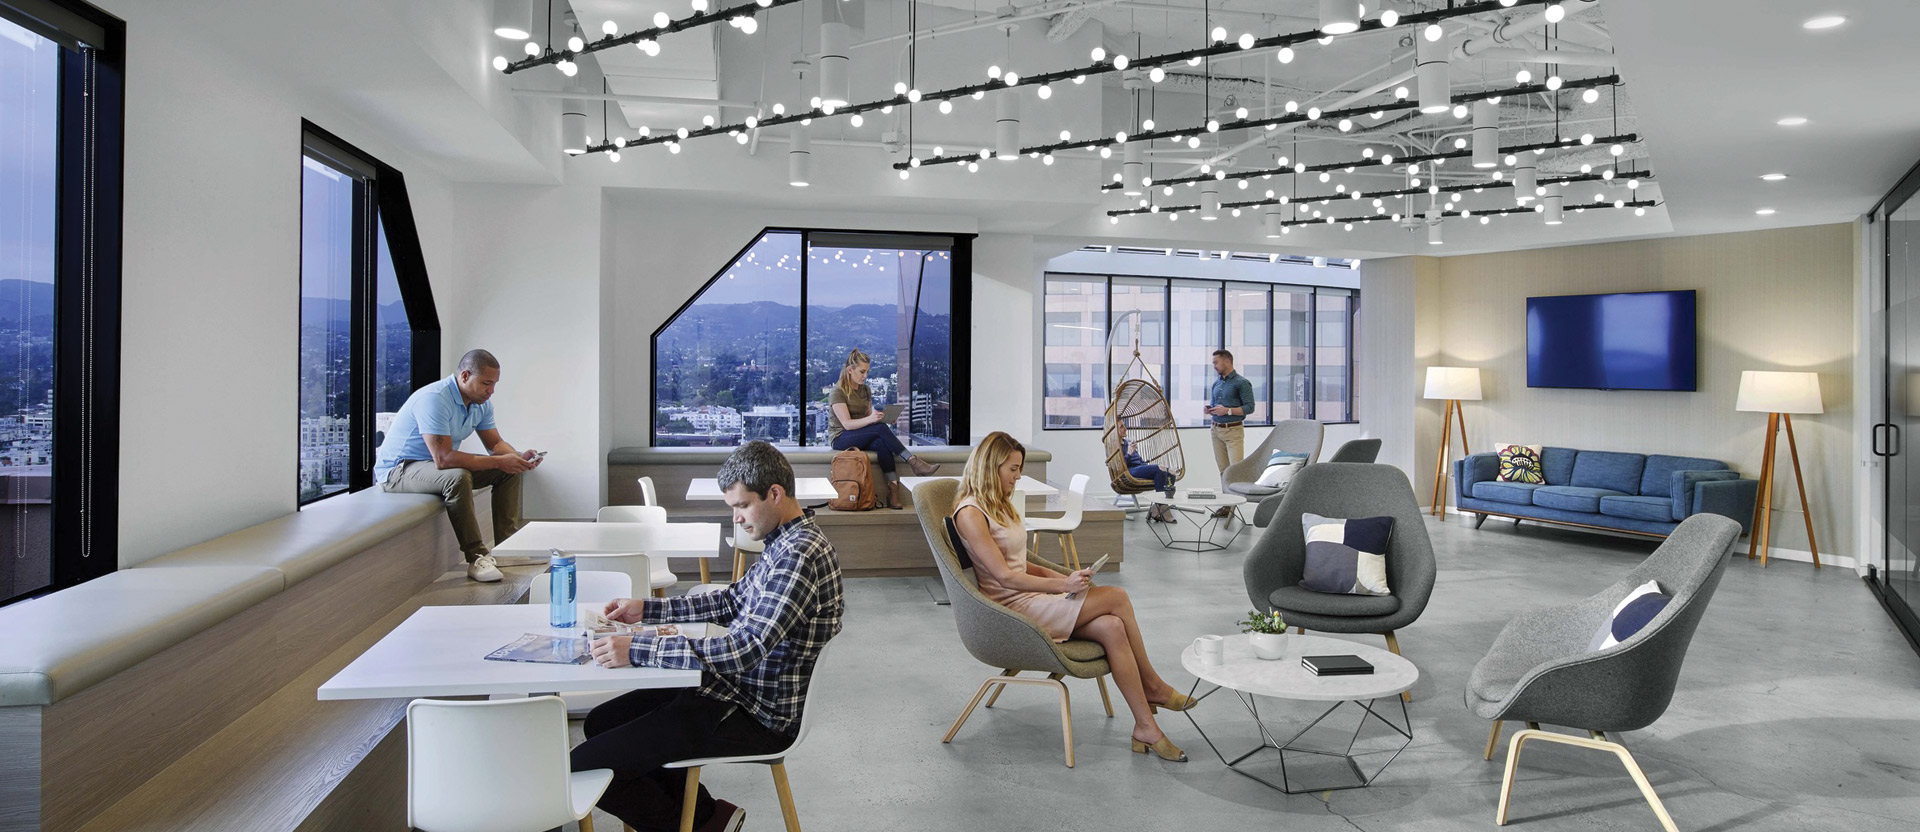 Modern open-plan office space with industrial ceiling, track lighting, exposed ductwork, and floor-to-ceiling windows offering a panoramic view of the cityscape. An eclectic mix of casual seating arrangements includes sofas, armchairs, and collaboration-friendly workstations with employees engaged in various tasks.